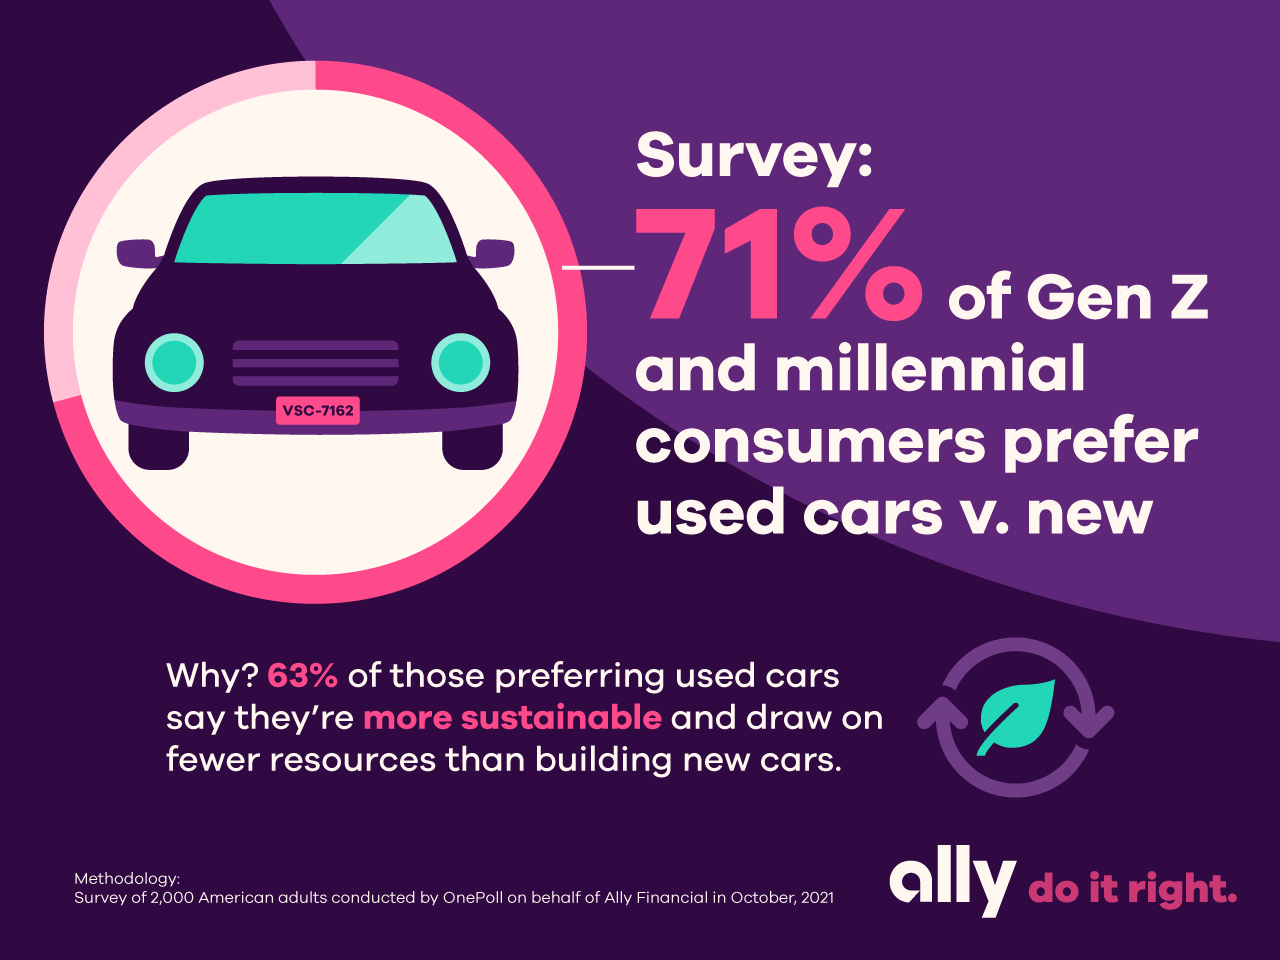 Survey: 71% of Gen Z and millennial consumers prefers used cars v. new. Why? 63% of those preferring used cars say they're more sustainable and draw on fewer resources than building new cars. Methodology: Survey of 2,000 American adults conducted by OnePoll on behalf of Ally Financial in October, 2021